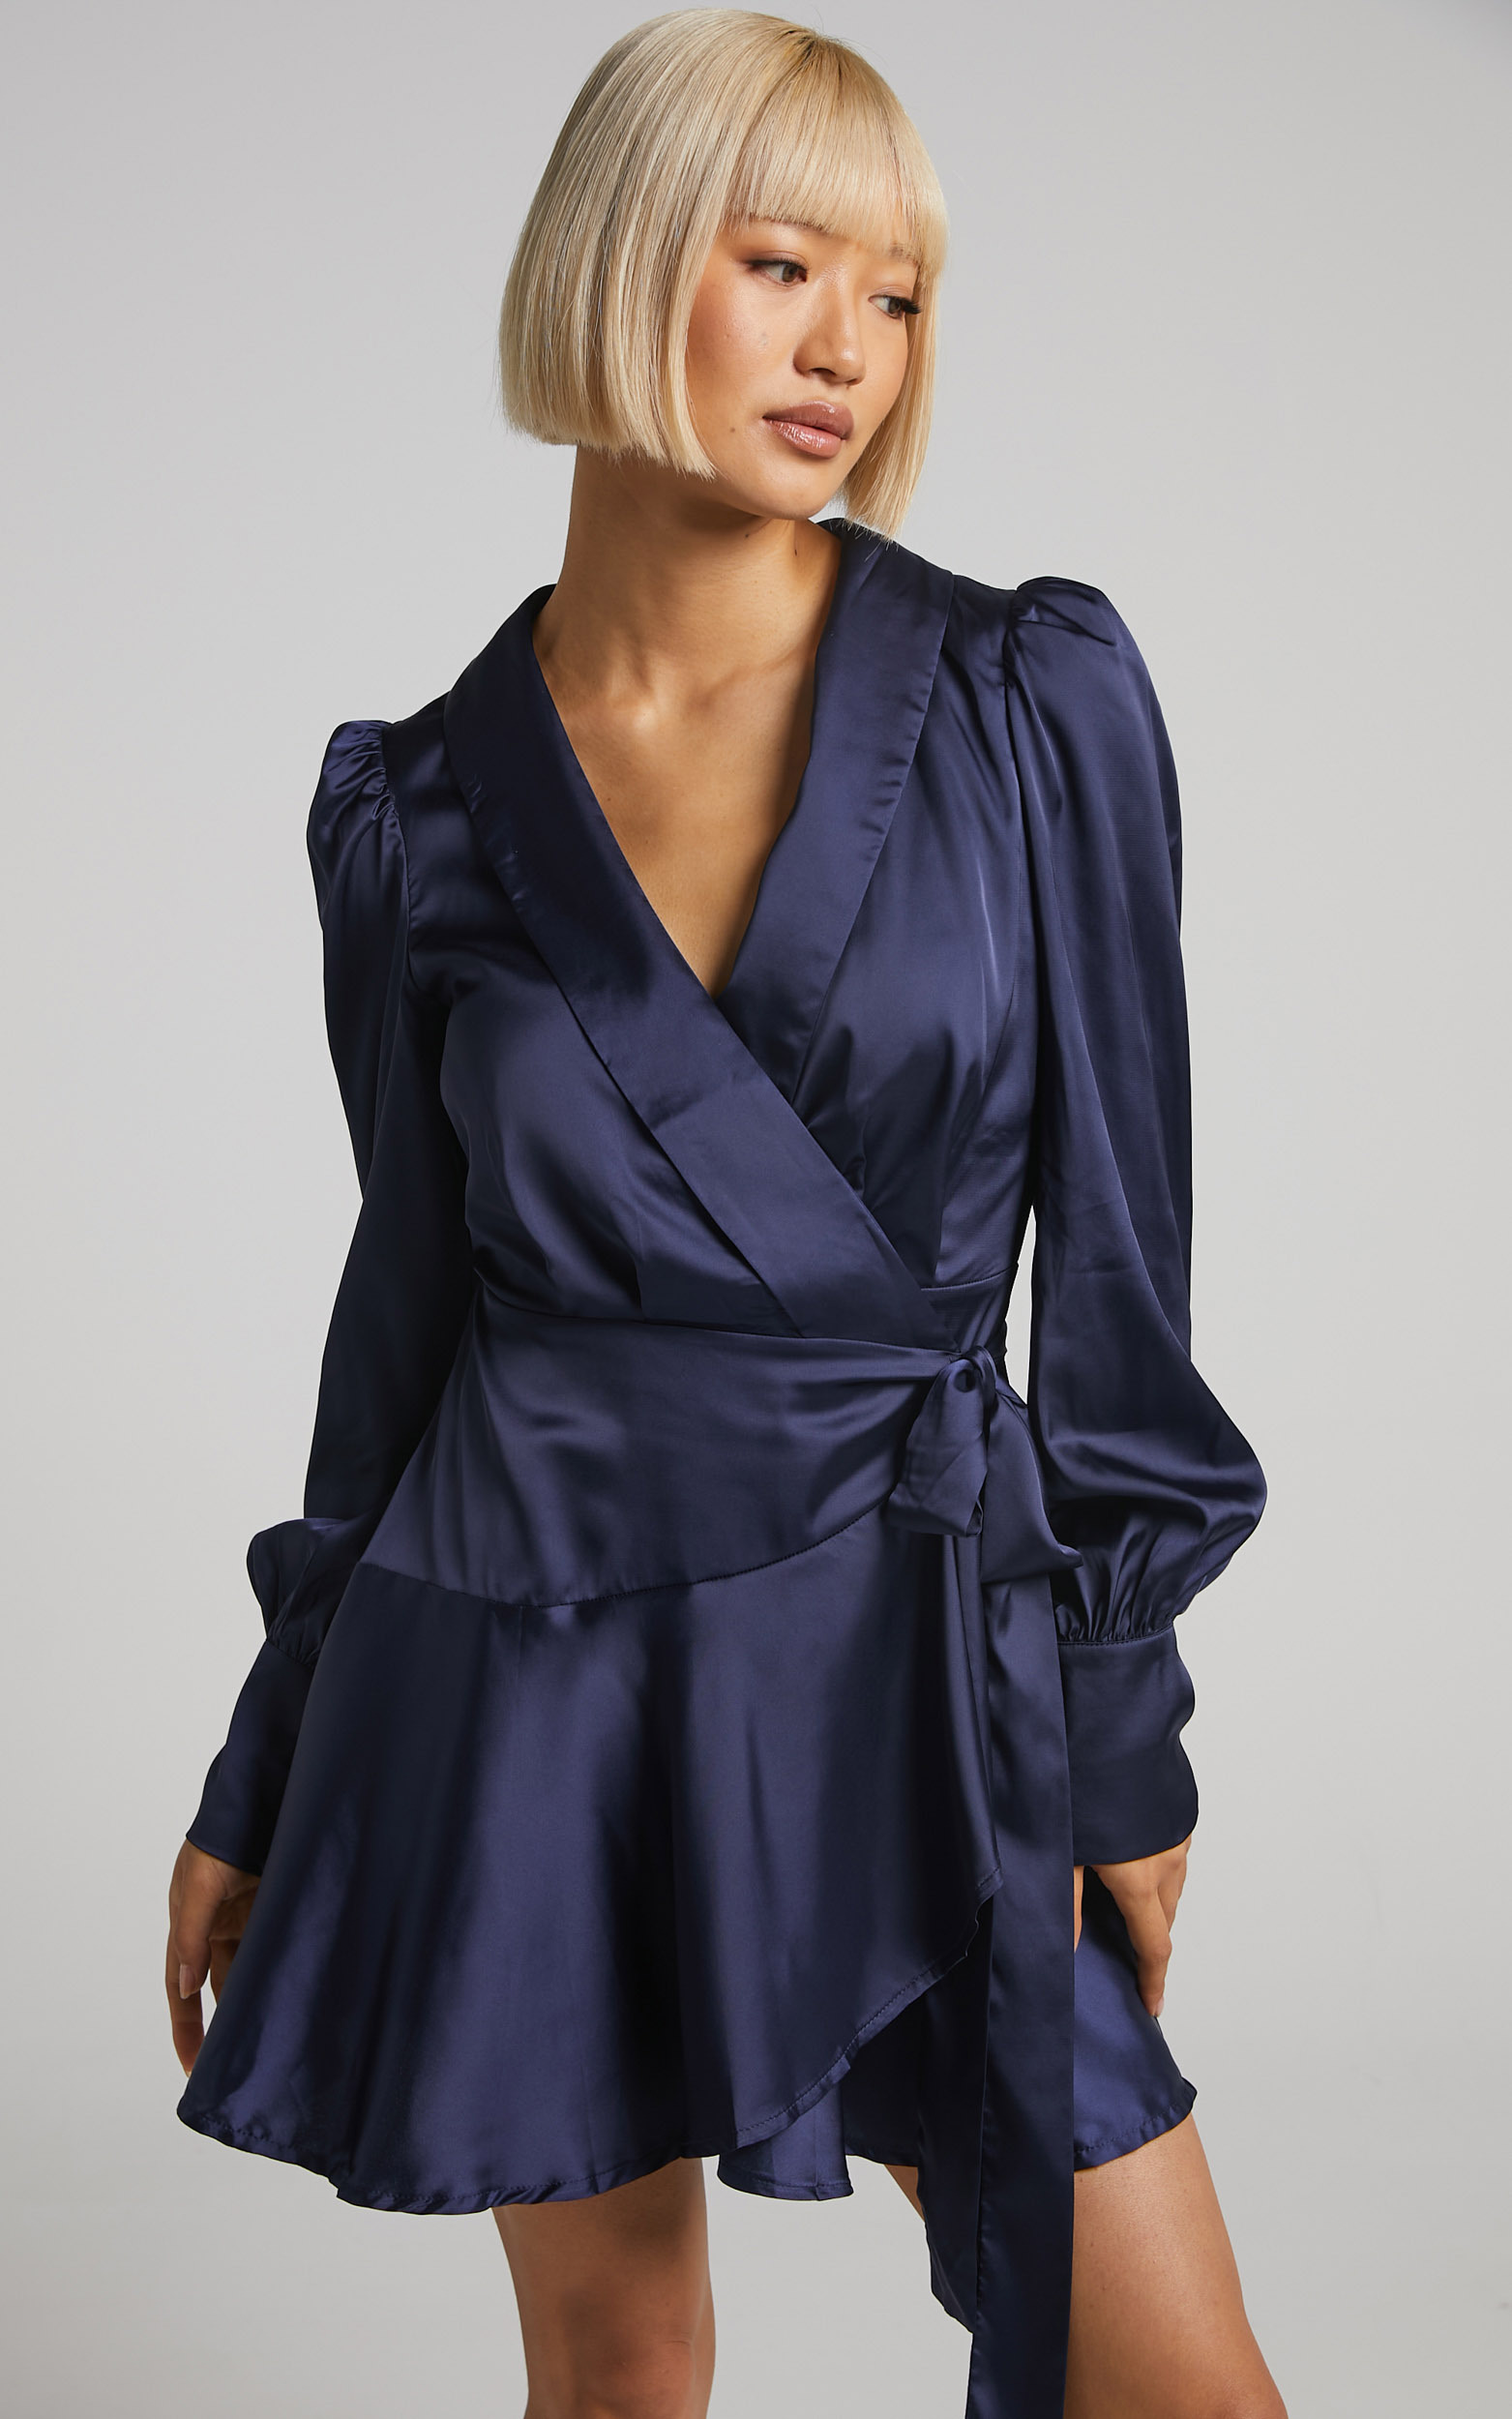 Breeana Wrap Mini Dress in Navy - 04, NVY1, hi-res image number null